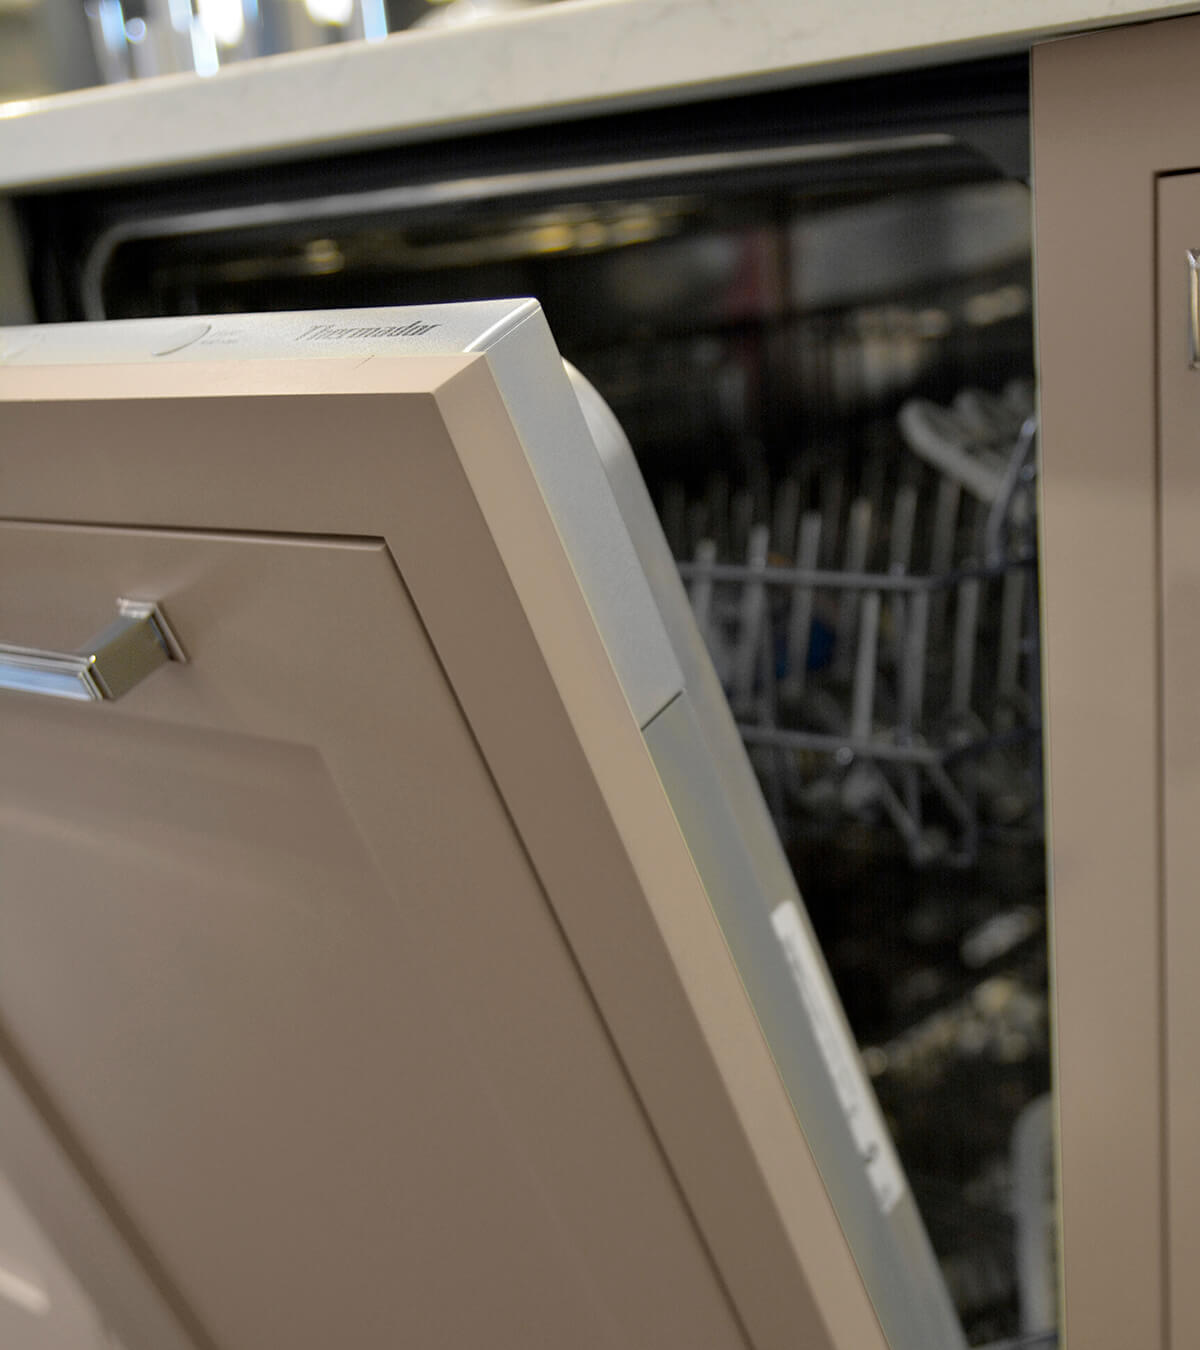 A paneled dishwasher with an inset styled cabinet panel shown when open.